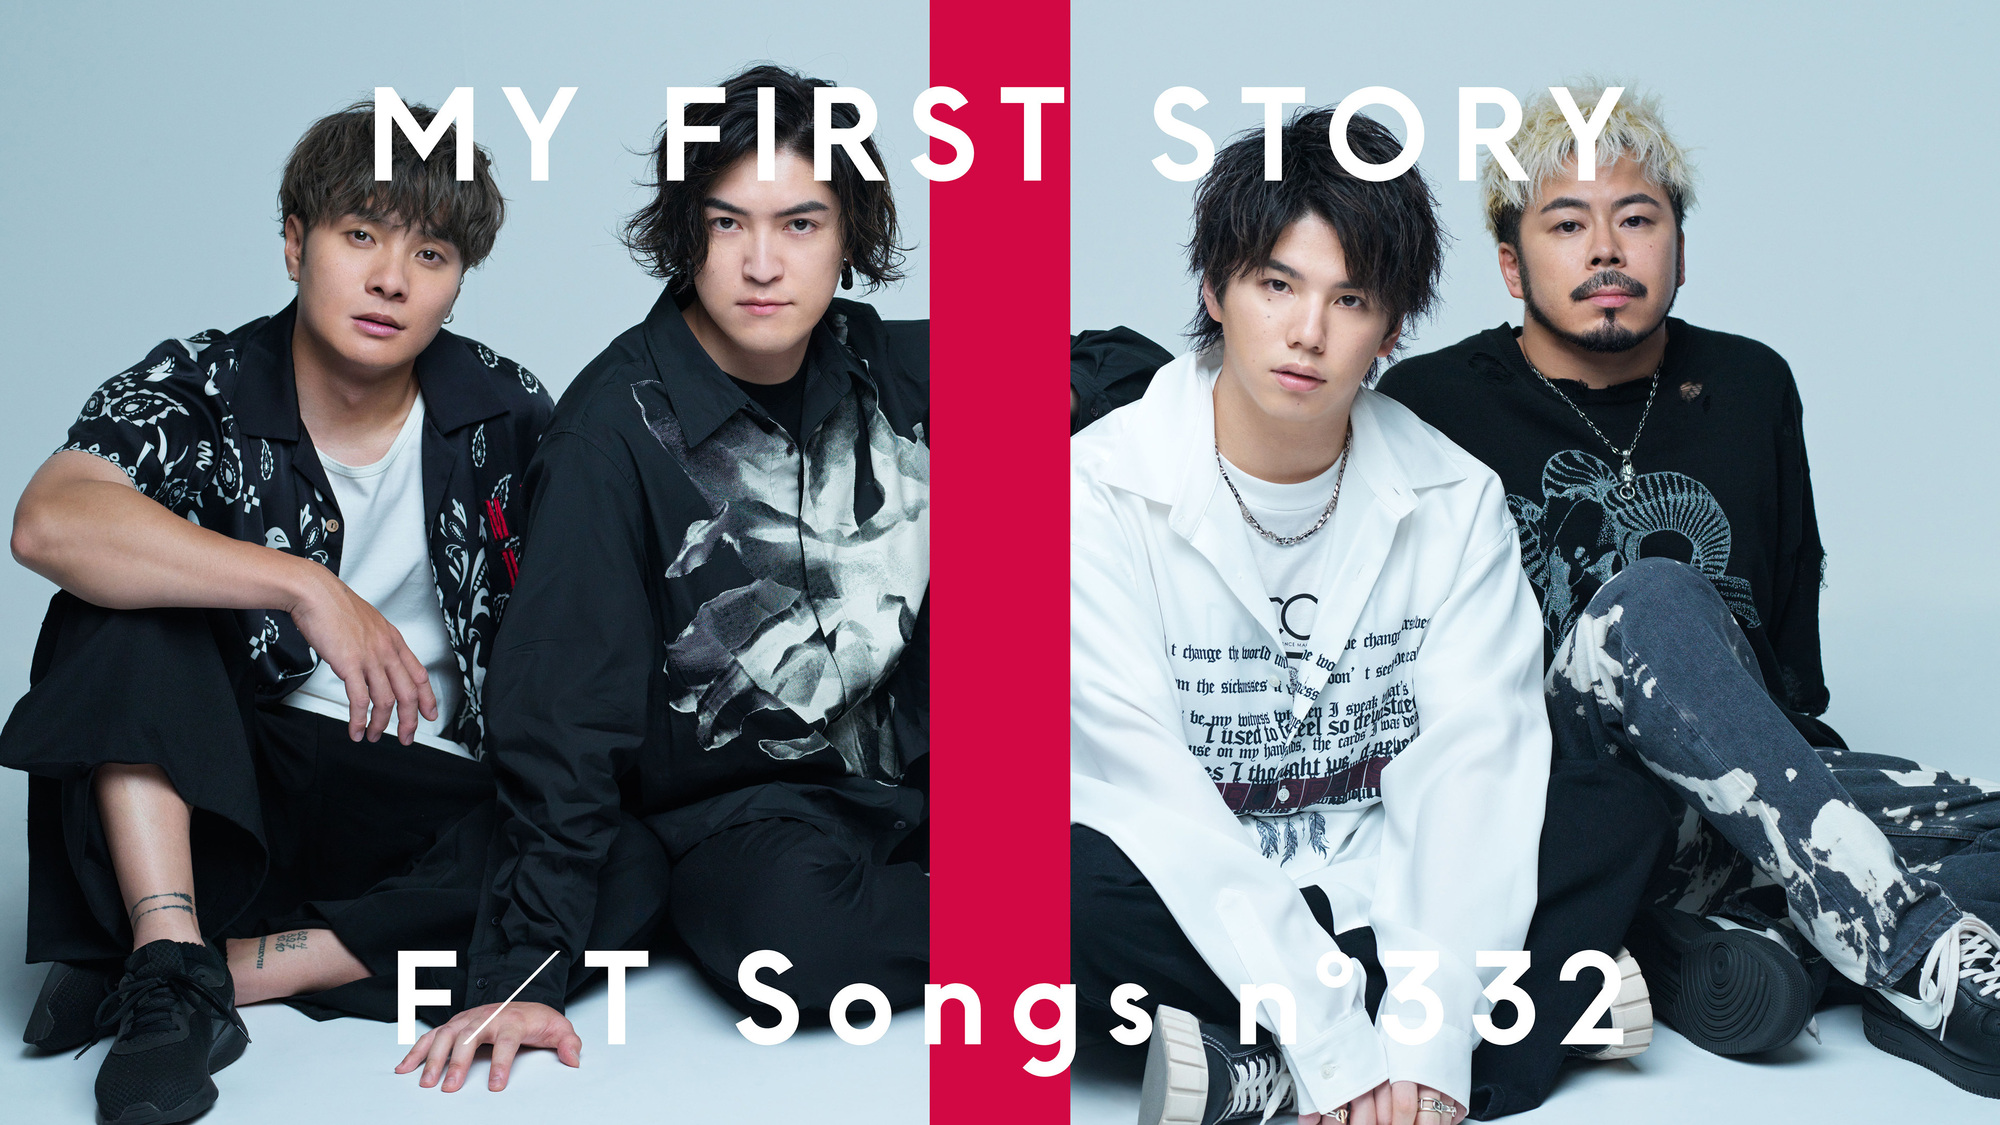 NEWS!!】「THE FIRST TAKE」に４人組ロックバンドMY FIRST STORYが再